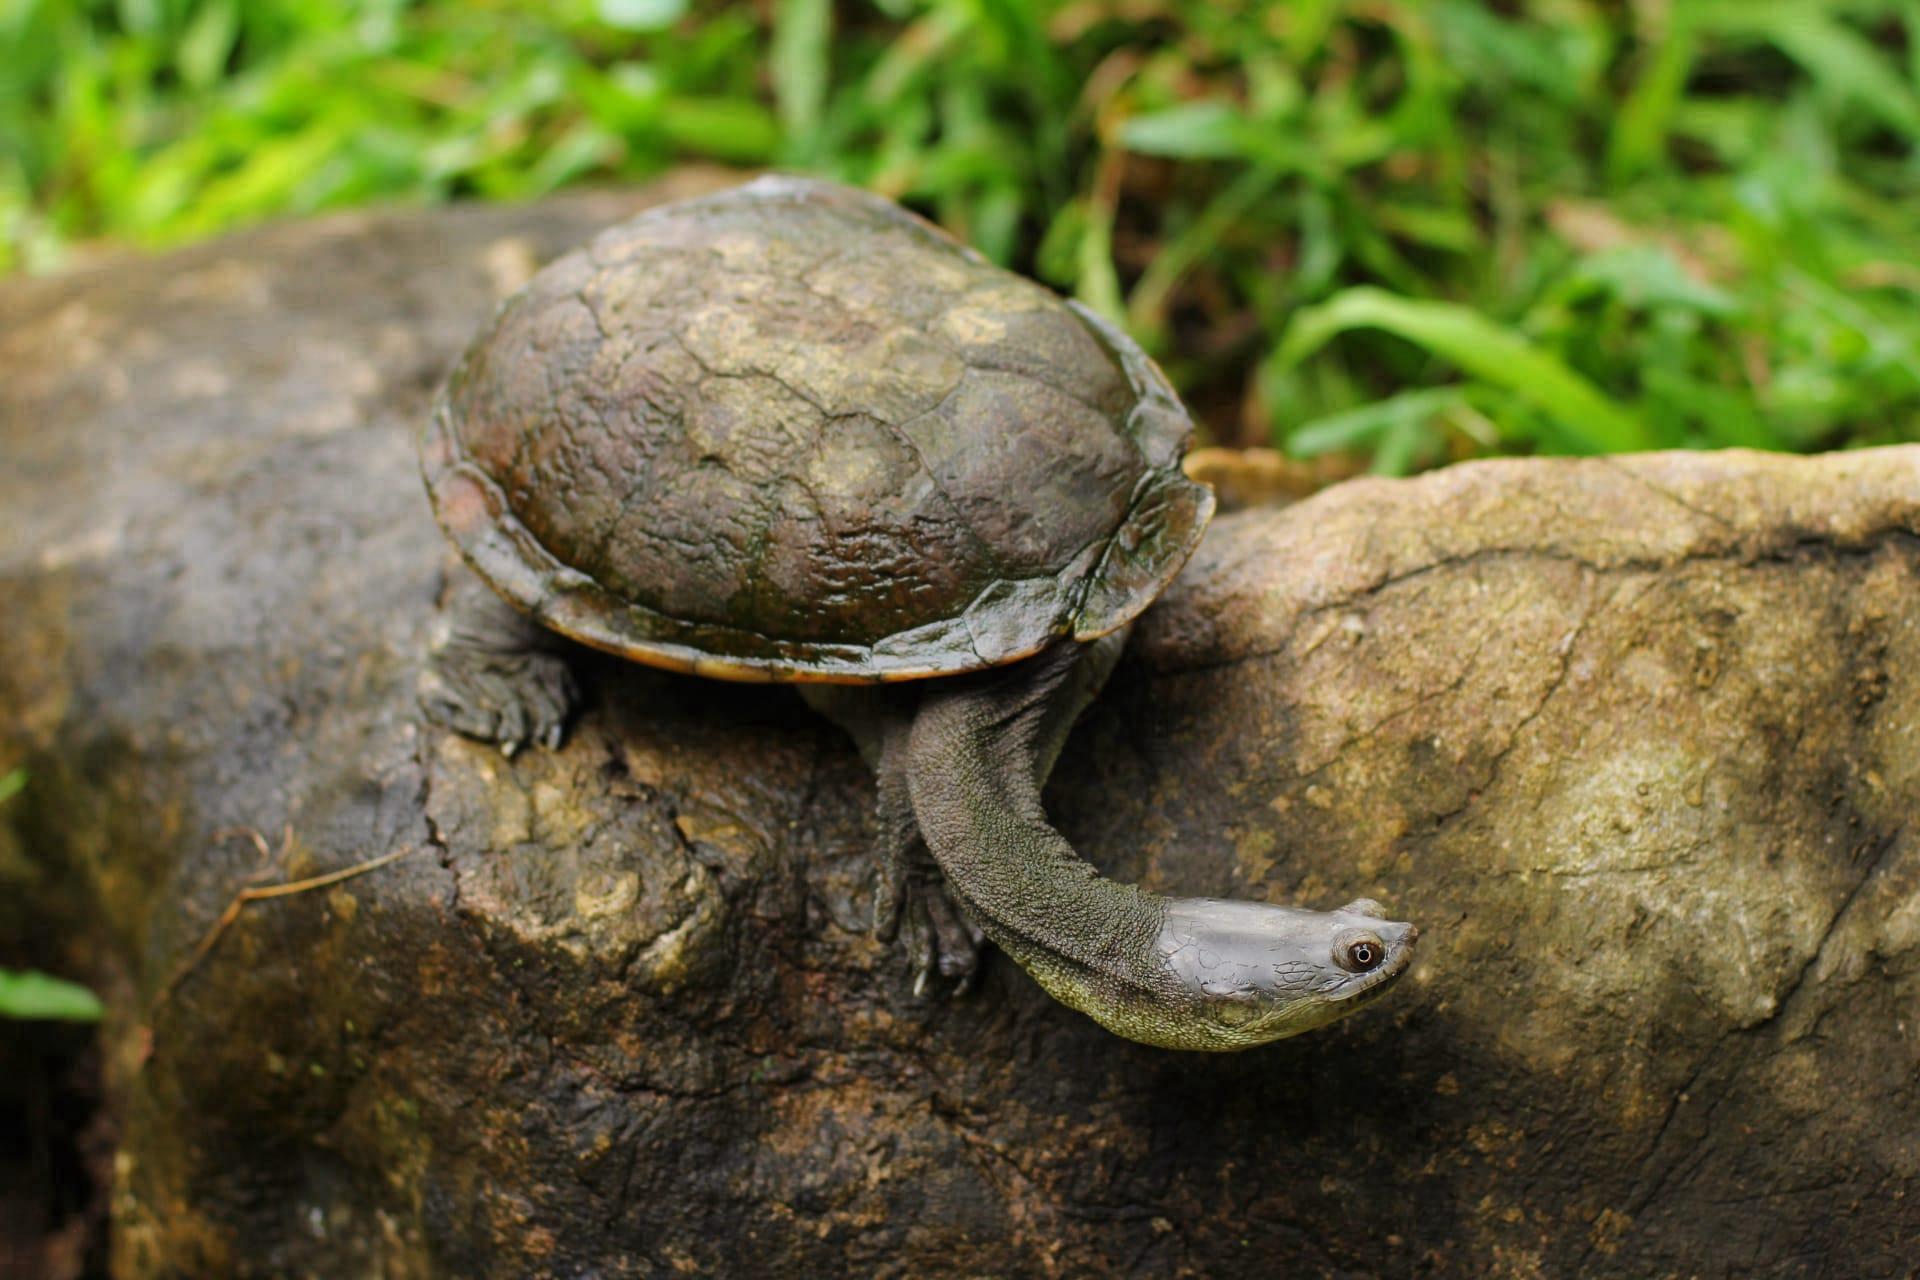 Snake necked turtle pictures